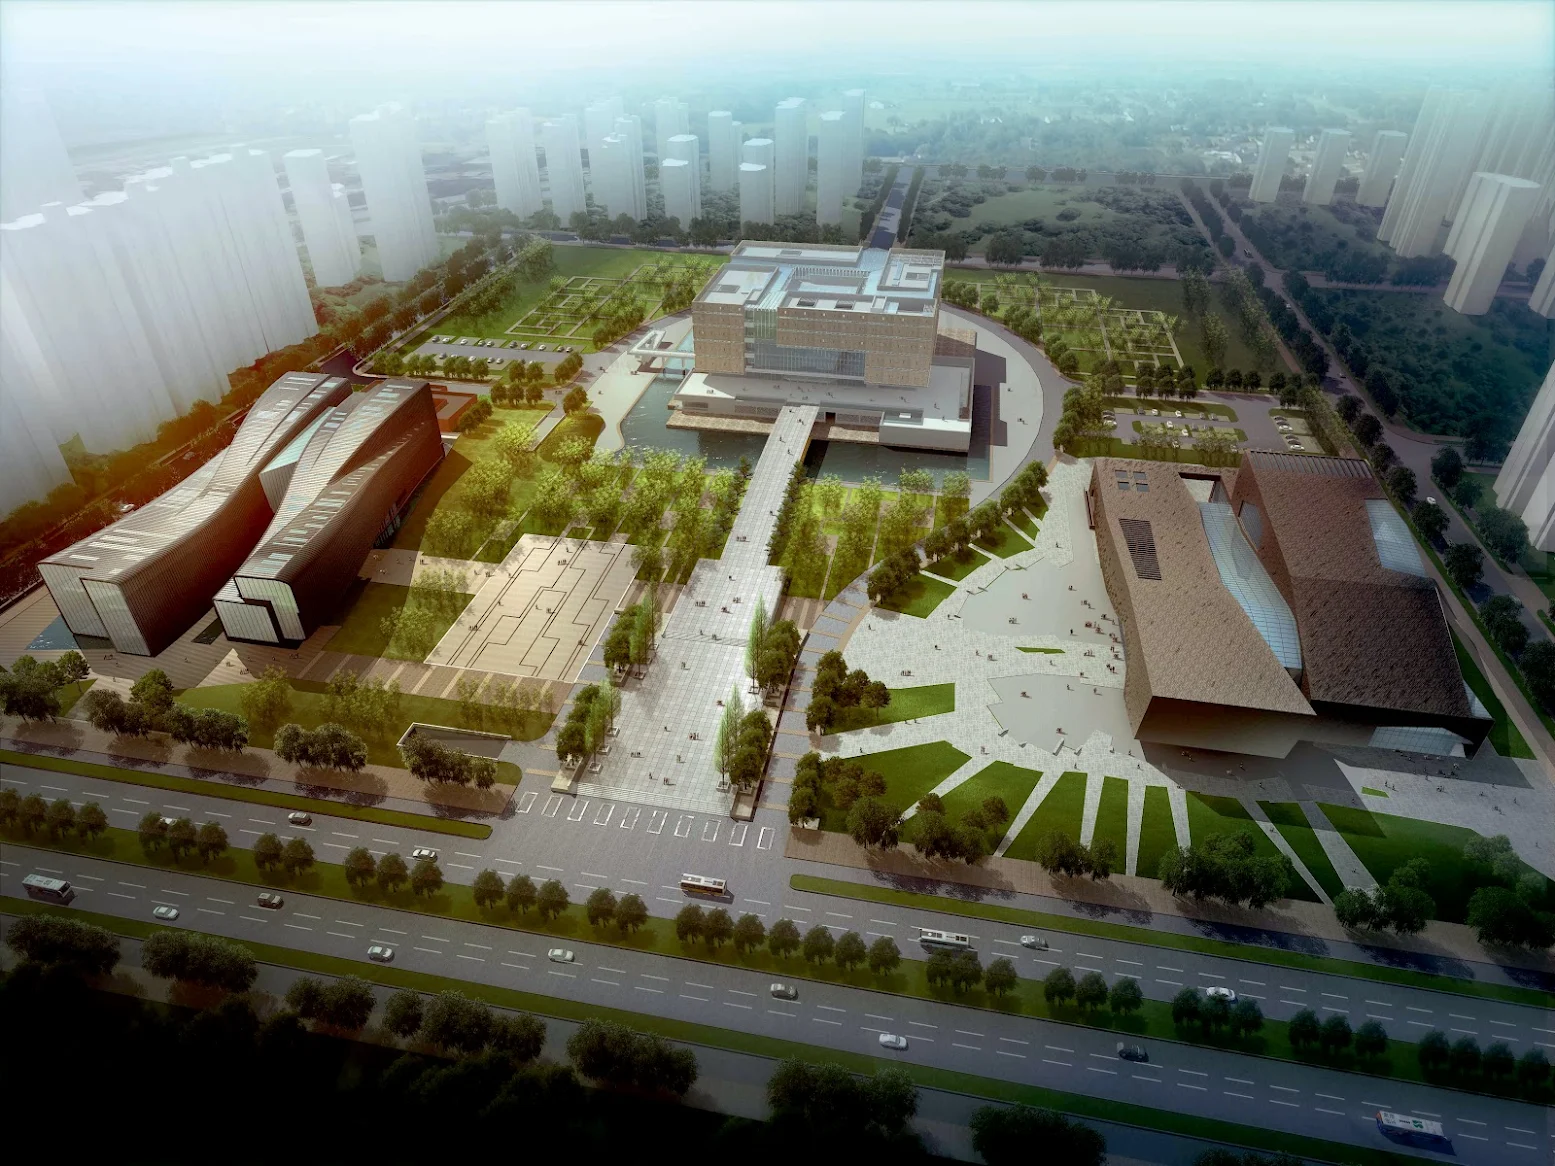 Anhui Provincial Art Museum by RTA Office